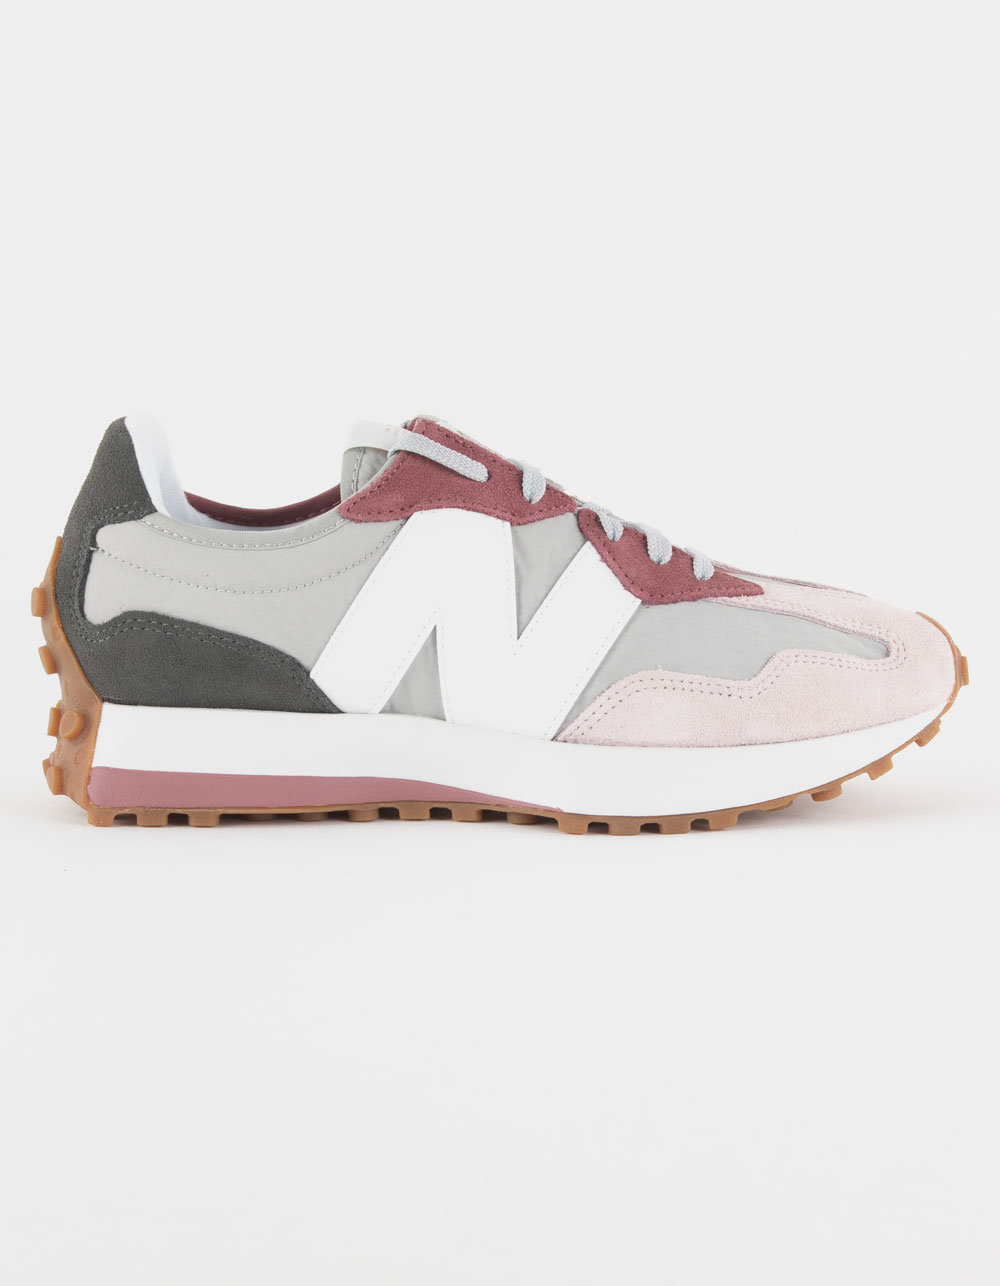 NEW BALANCE 327 Womens Shoes - STONE | Tillys